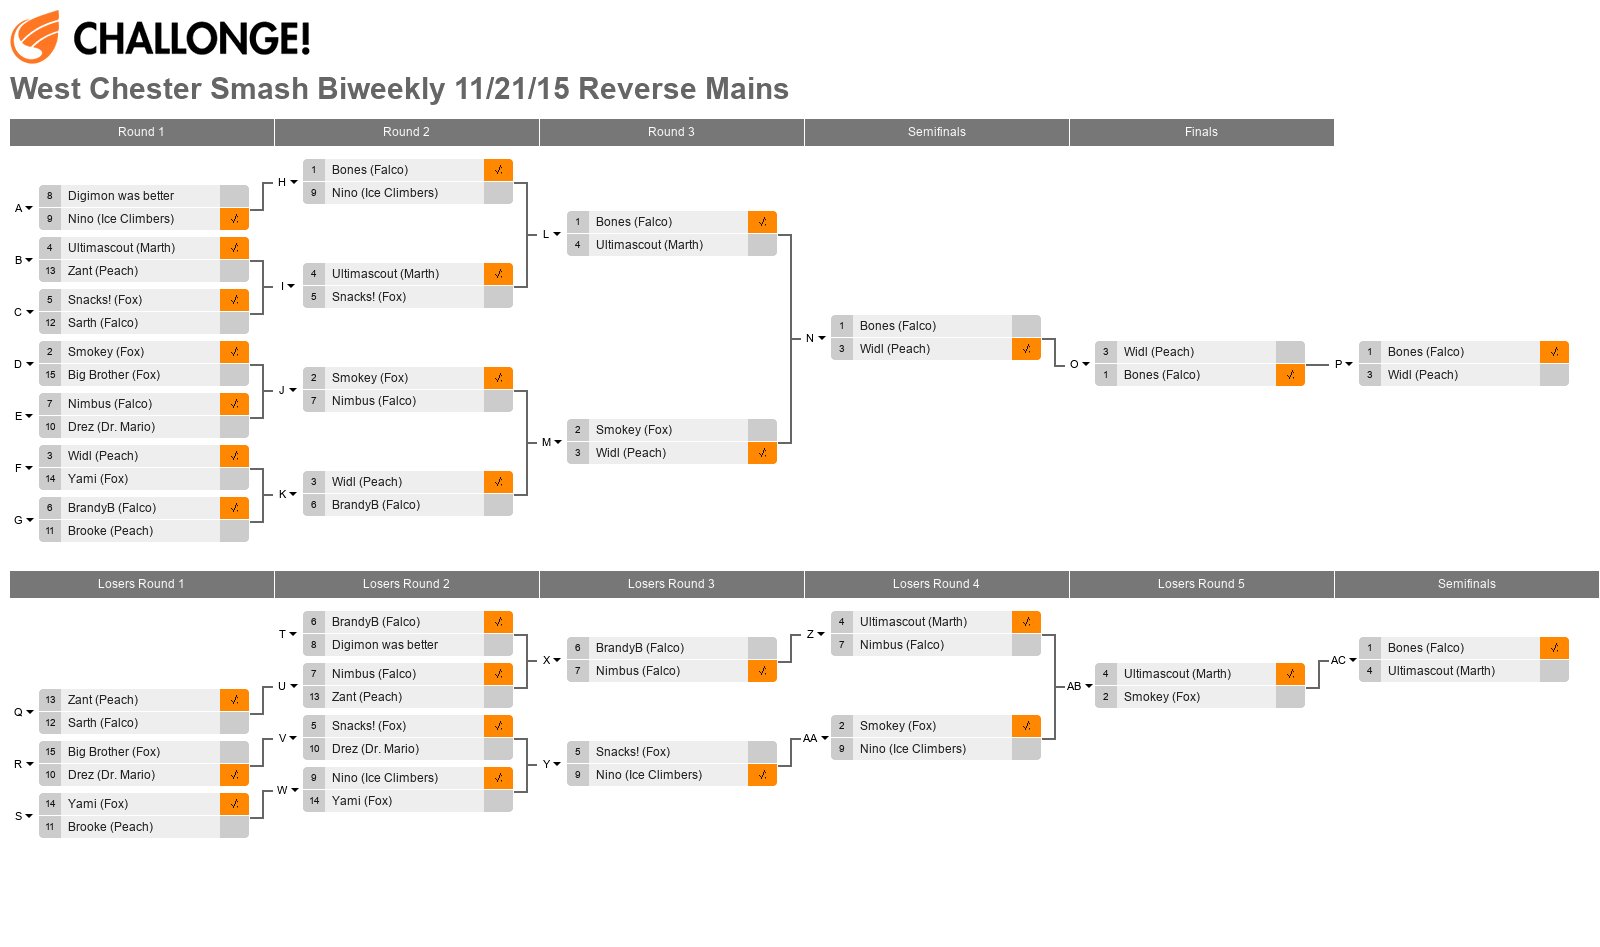 West Chester Smash Biweekly 11/21/15 Reverse Mains